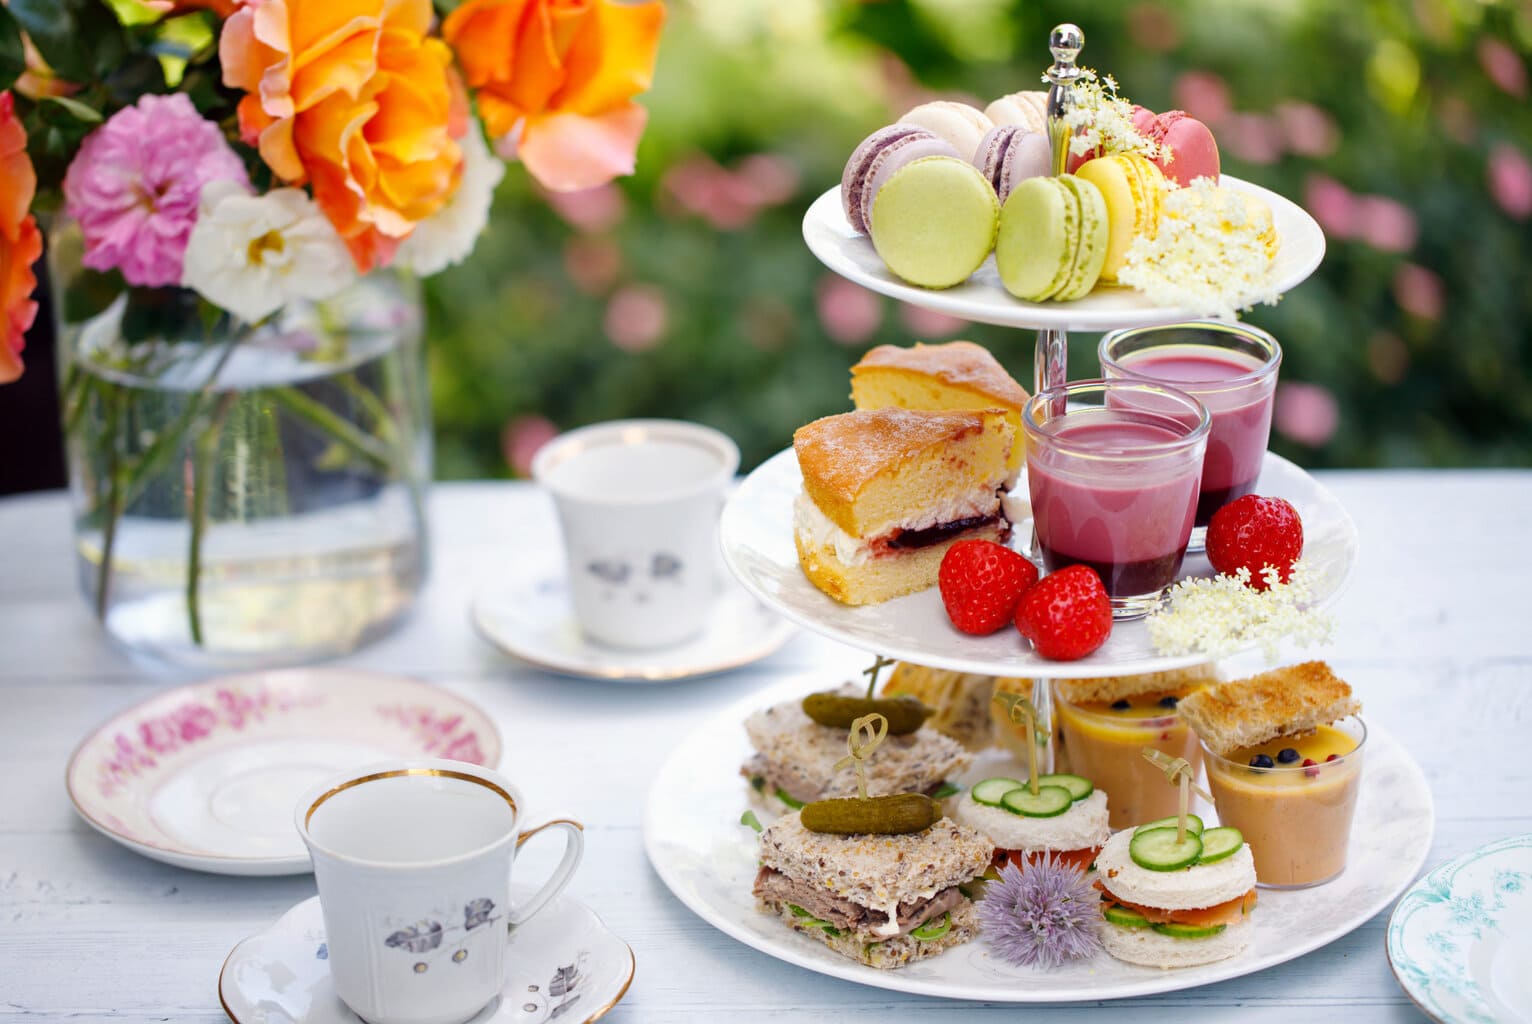 table outside in a garden with a white tablecloth with a vase of colourful flowers on it and a three tiered white china cake stand with sandwiches scones and cakes on it and two china teacups alongside. Best afternoon tea in Bournemouth.